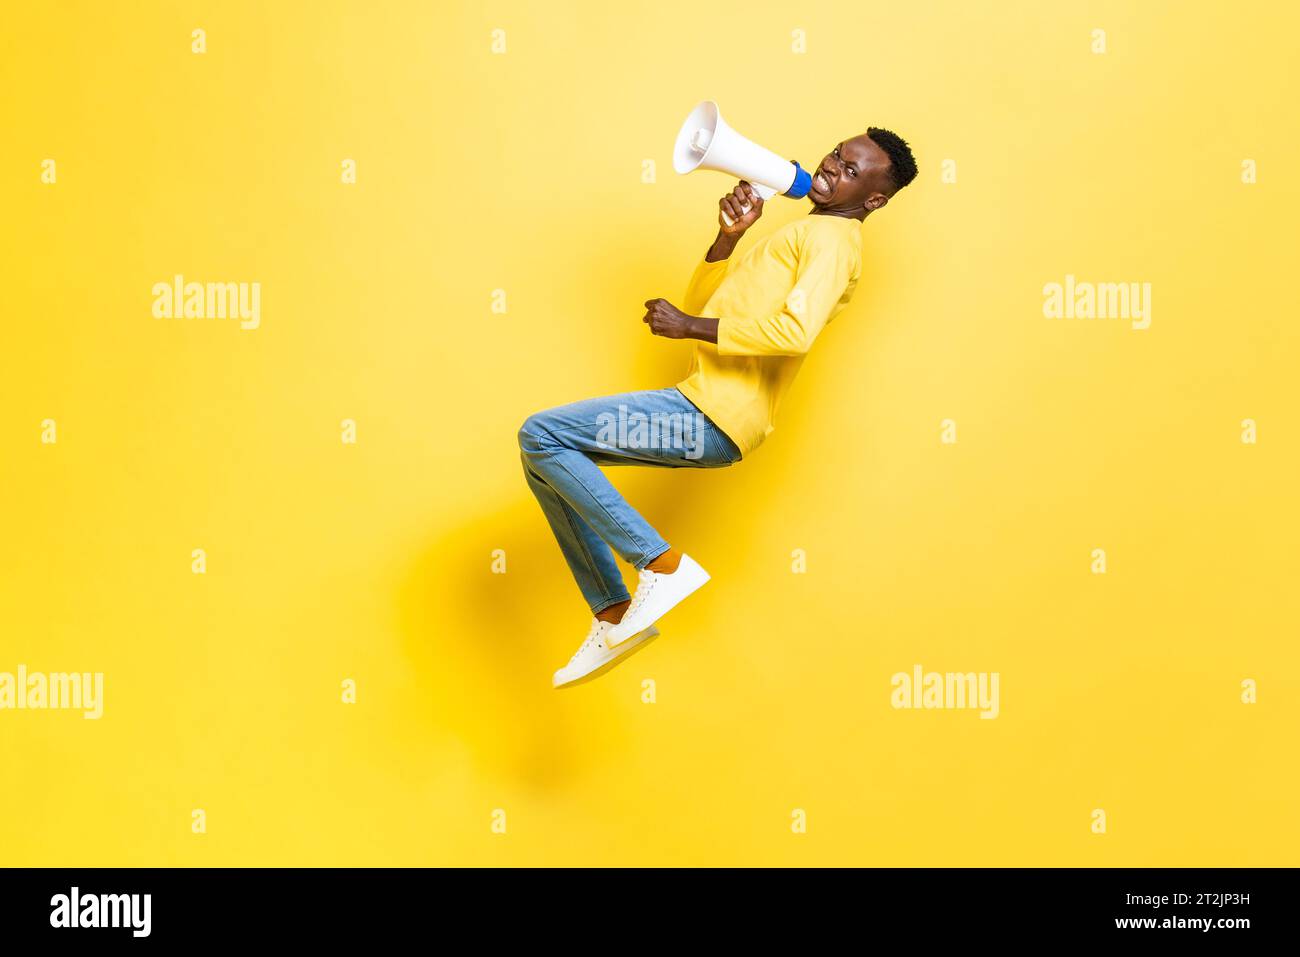 Full body side view of African angry man screaming in megaphone and looking at camera while levitating on yellow background Stock Photo